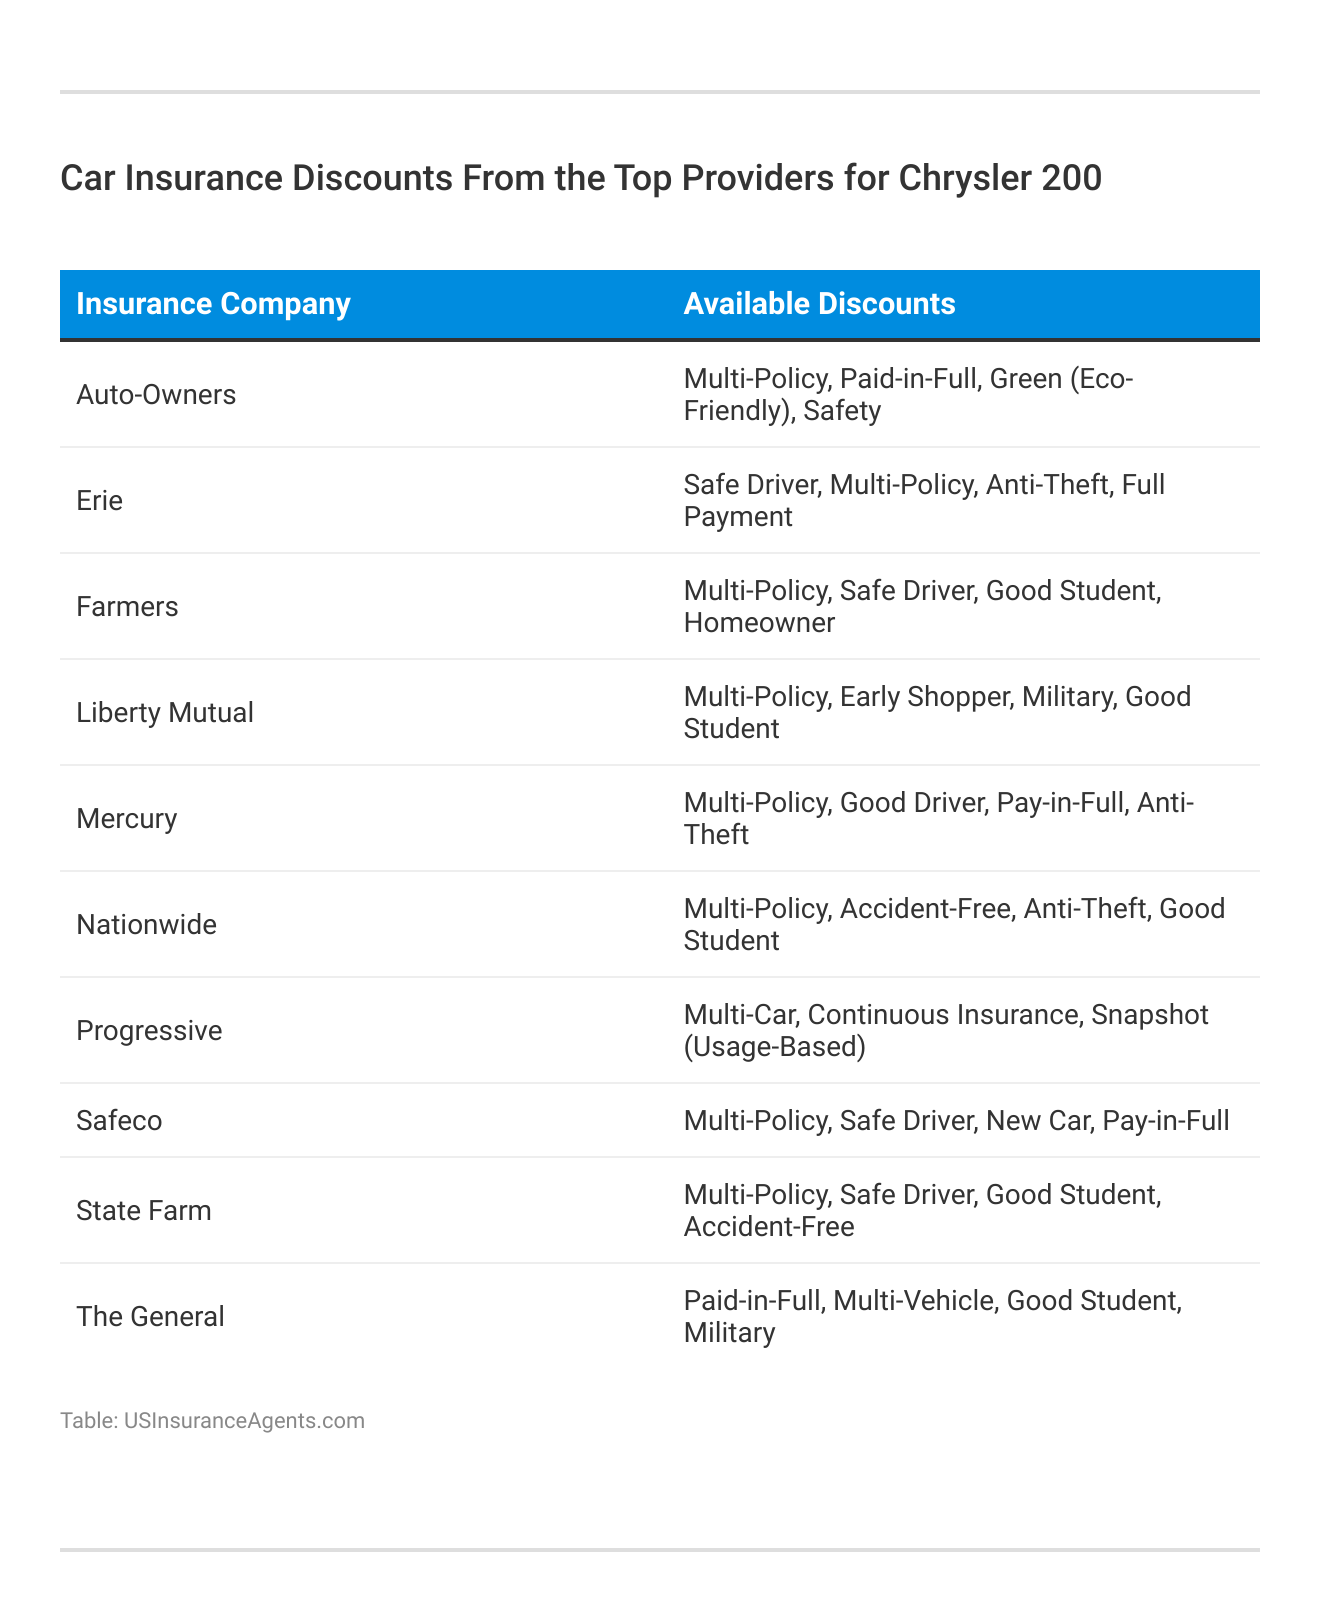 <h3>Car Insurance Discounts From the Top Providers for Chrysler 200</h3>